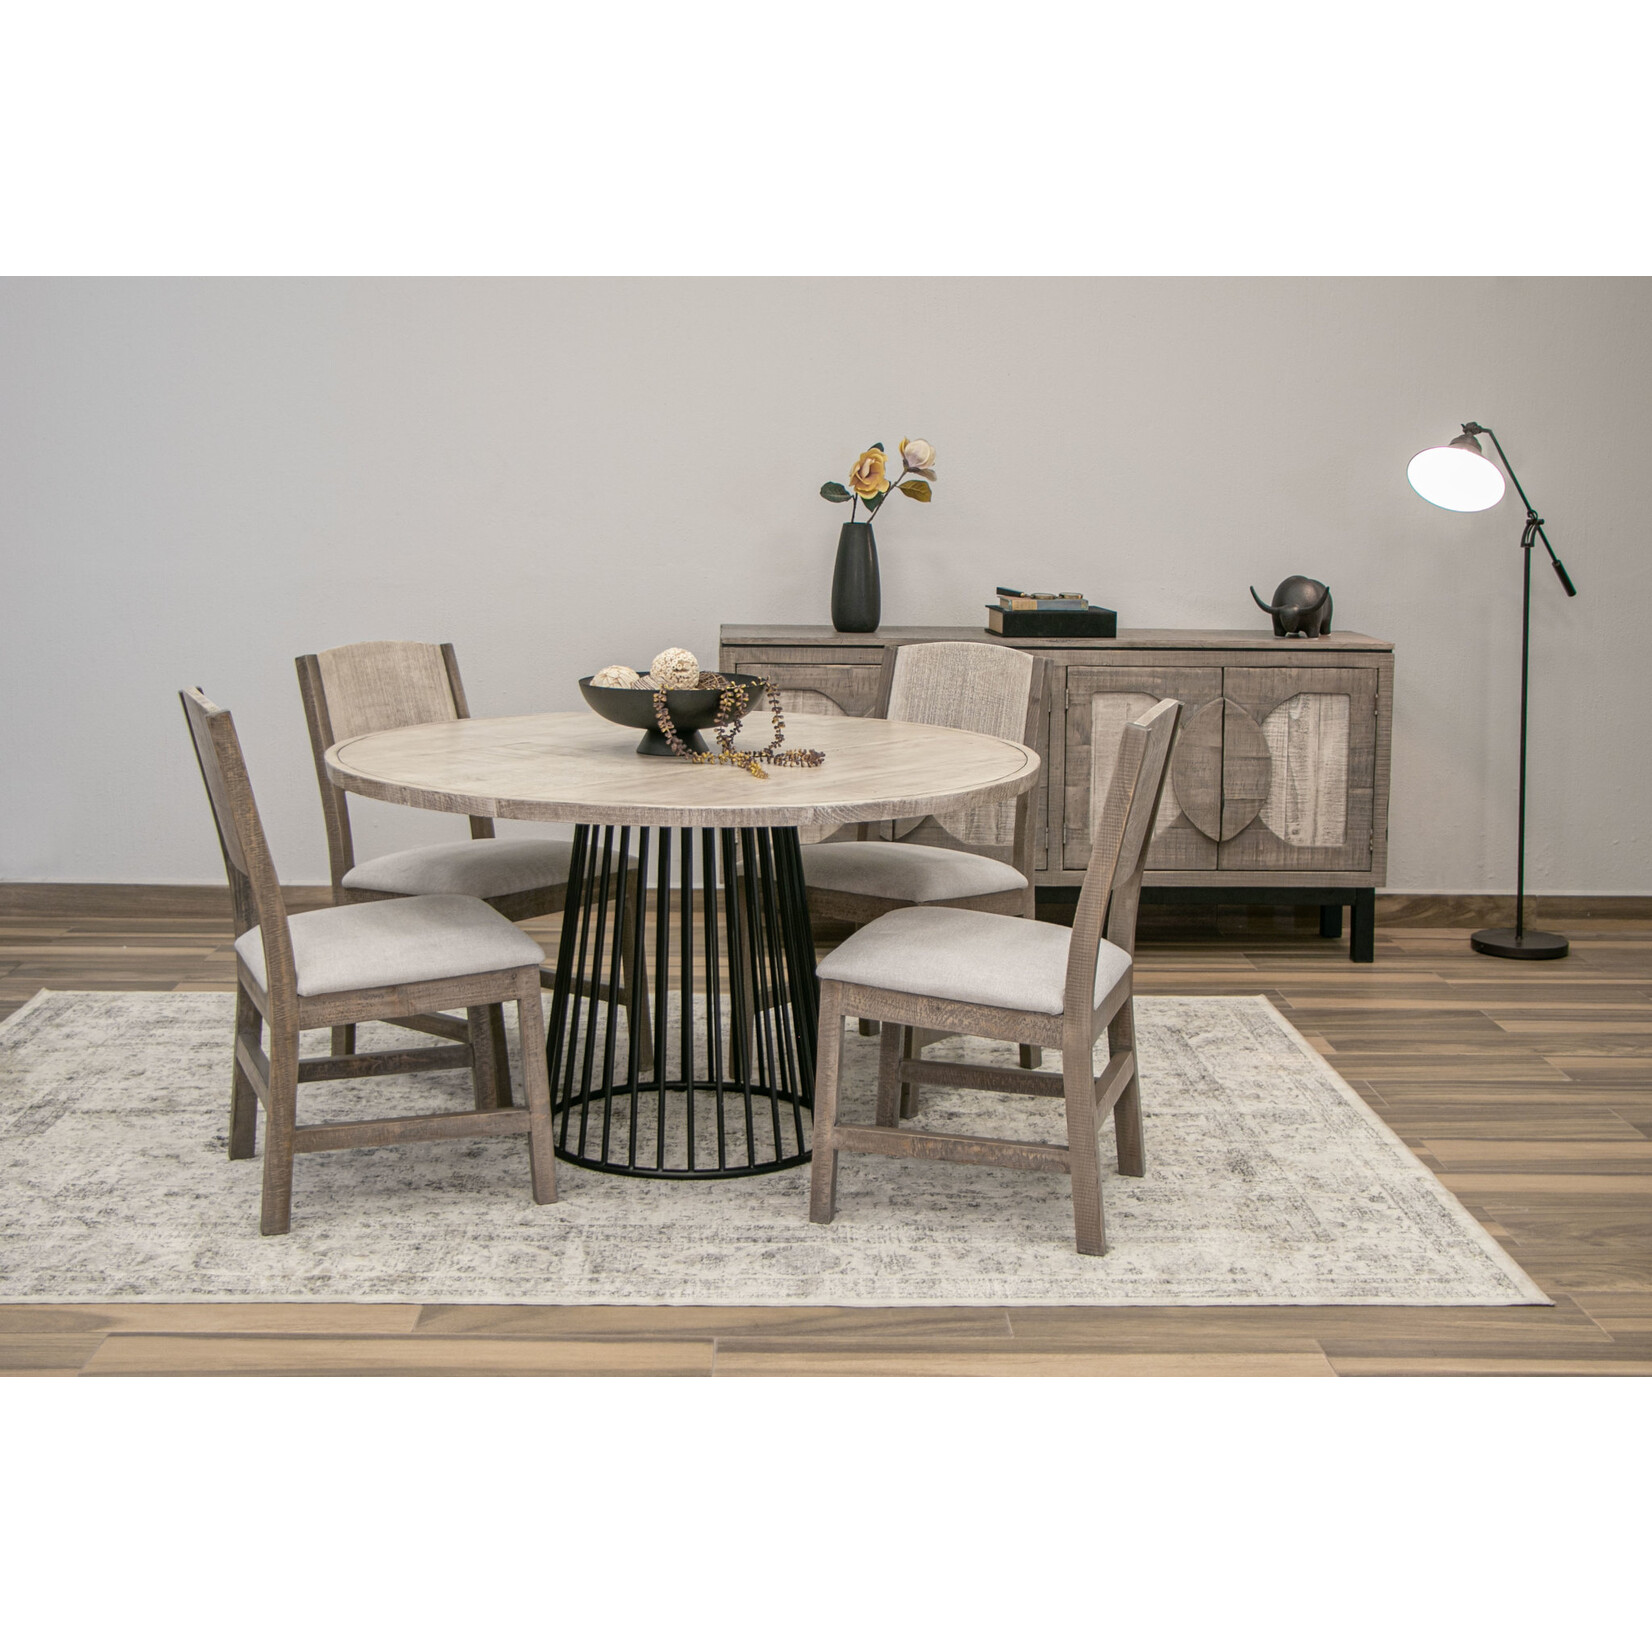 Cosala Round Dining set with 4 chairs